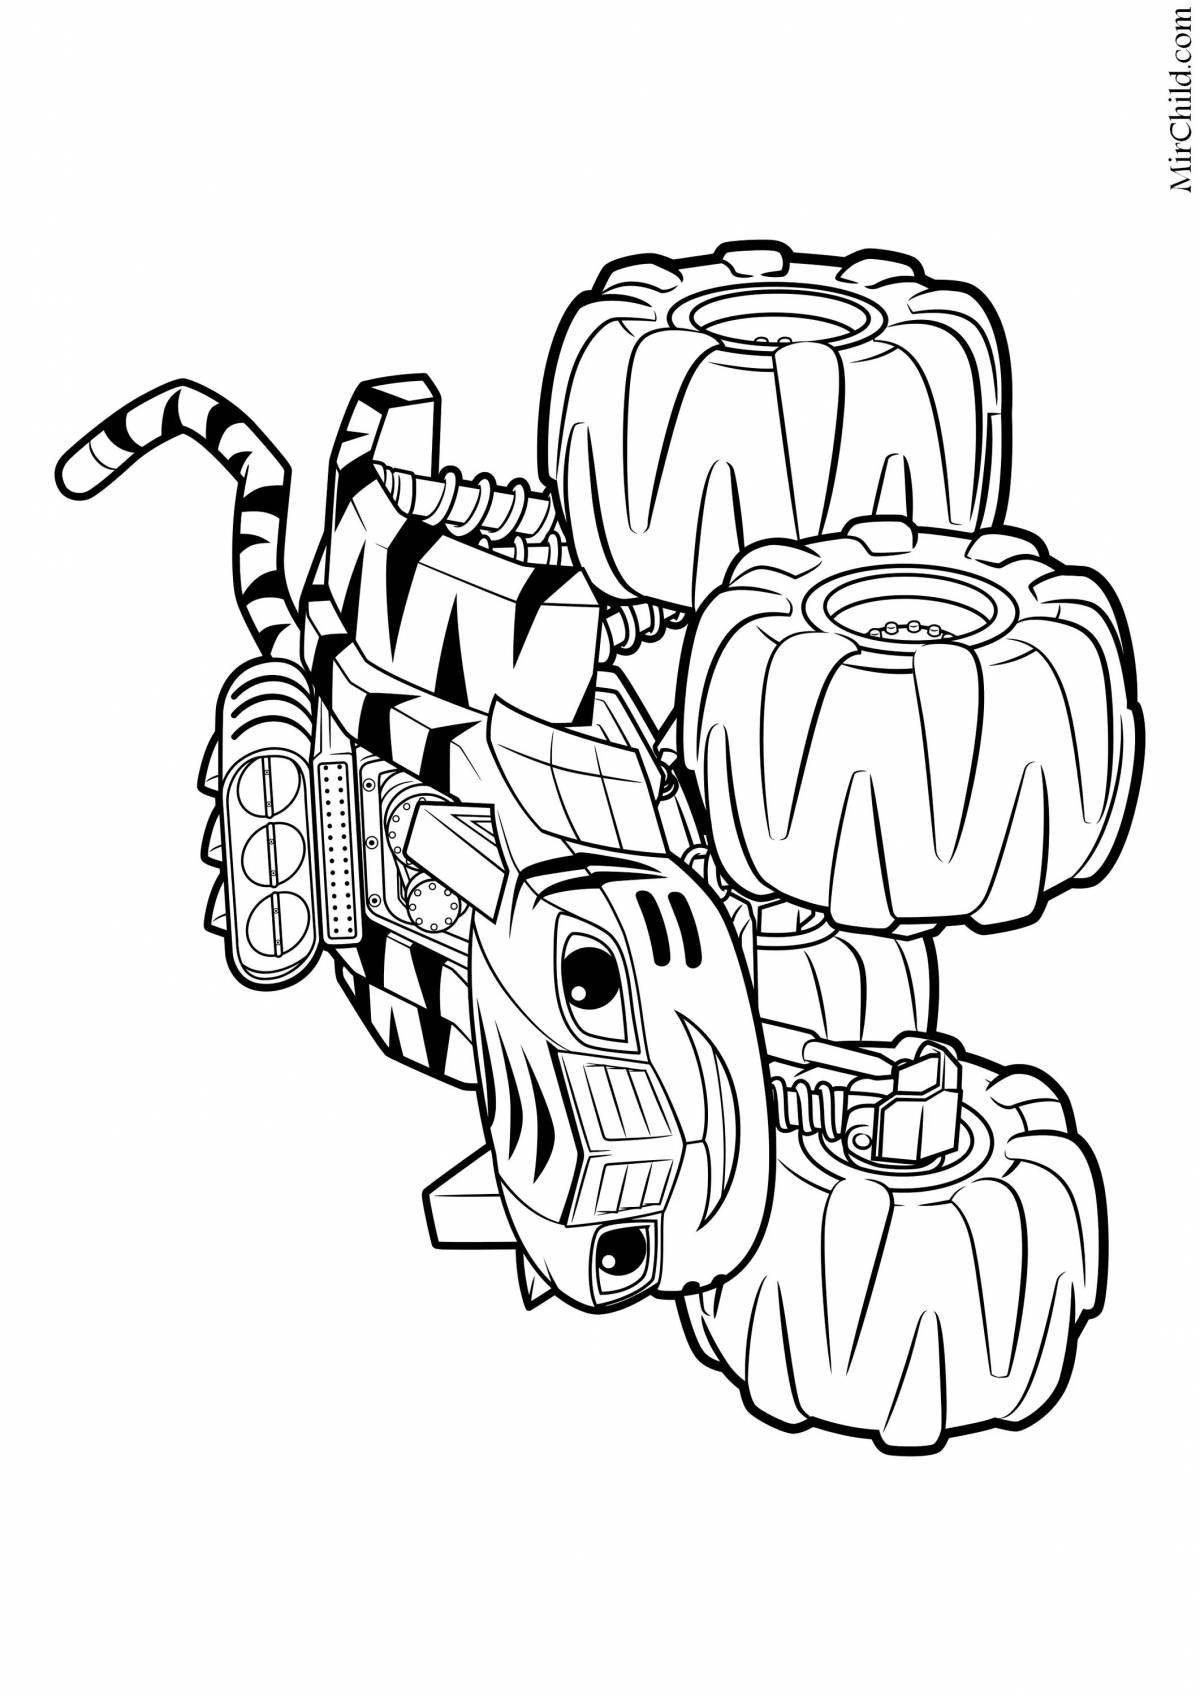 Cute growl coloring page